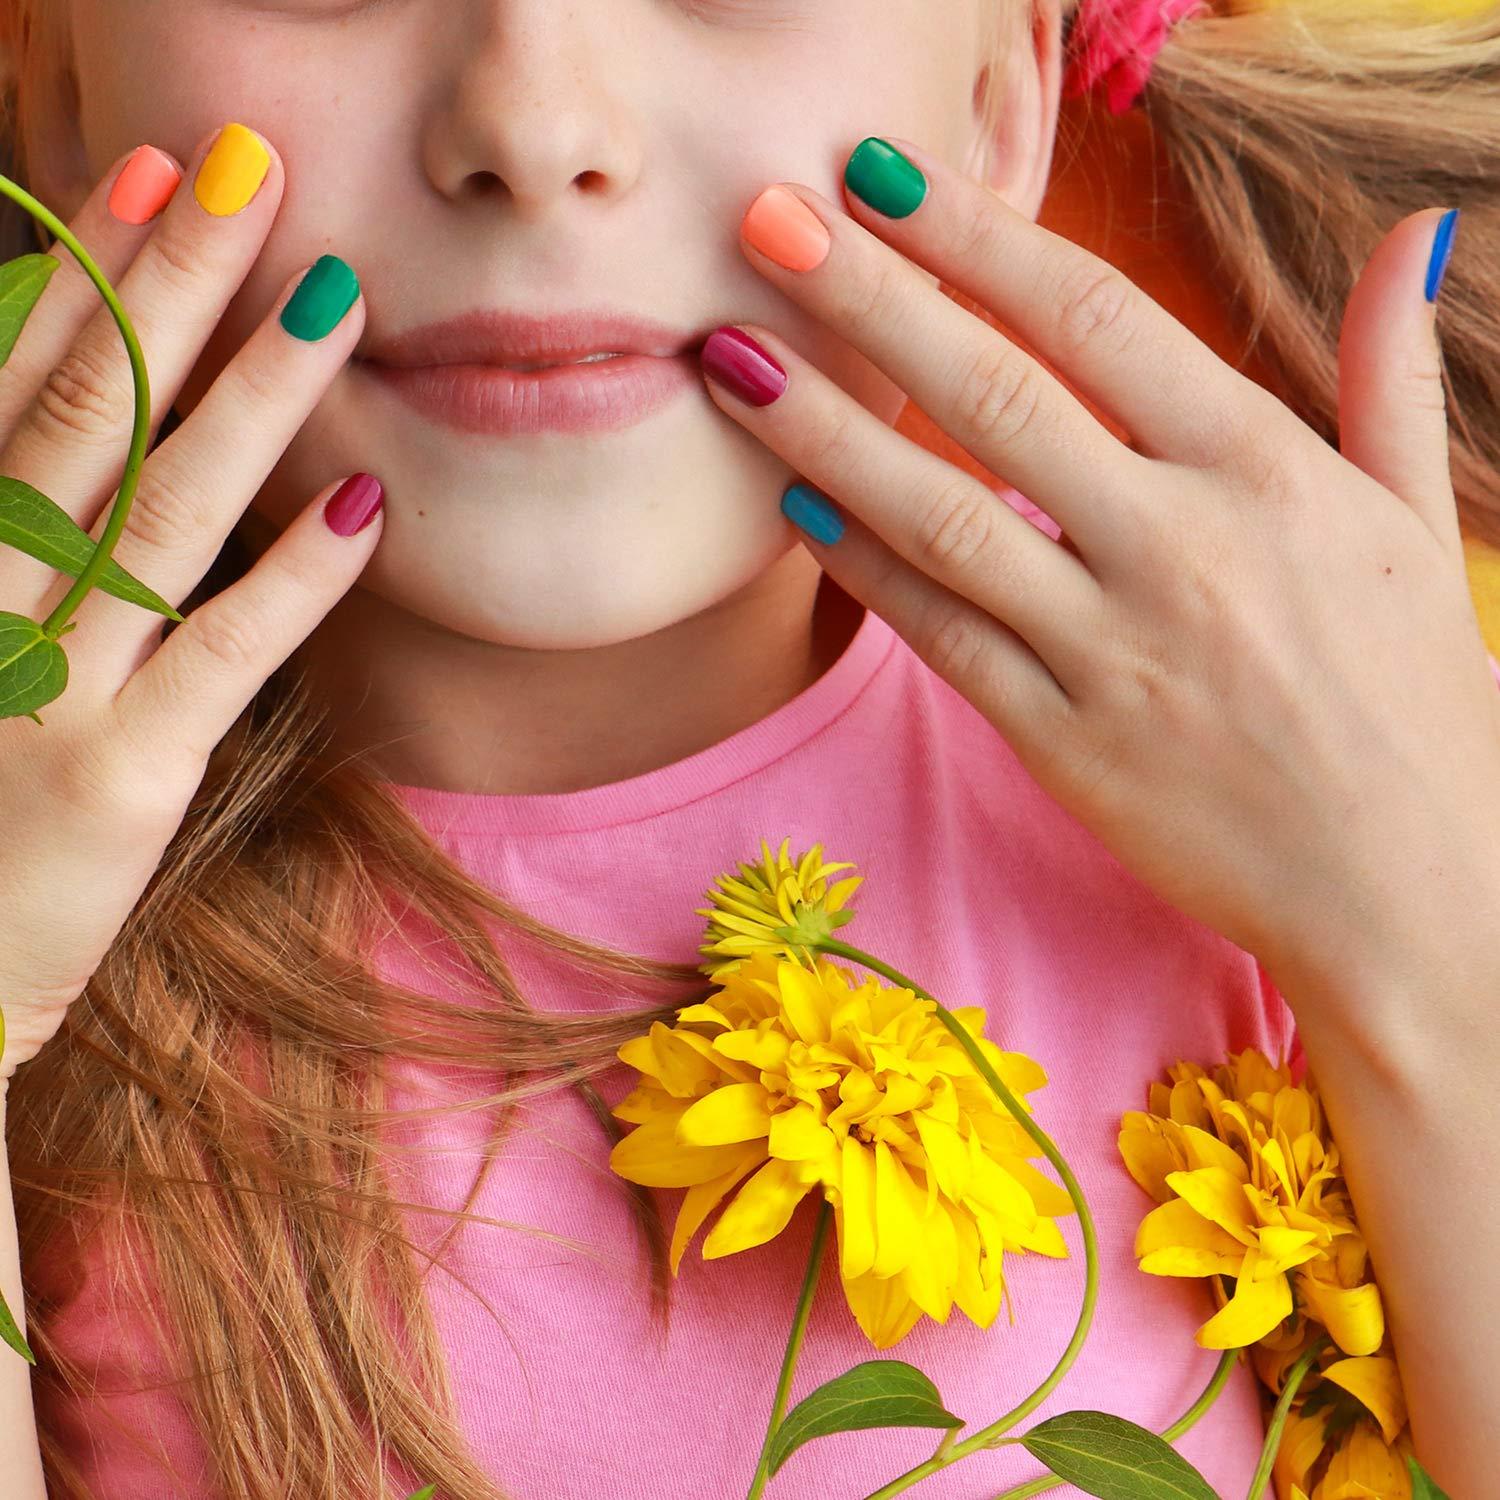 A Complete Guide: 5 Cute and Colorful Fake Nails for Kids